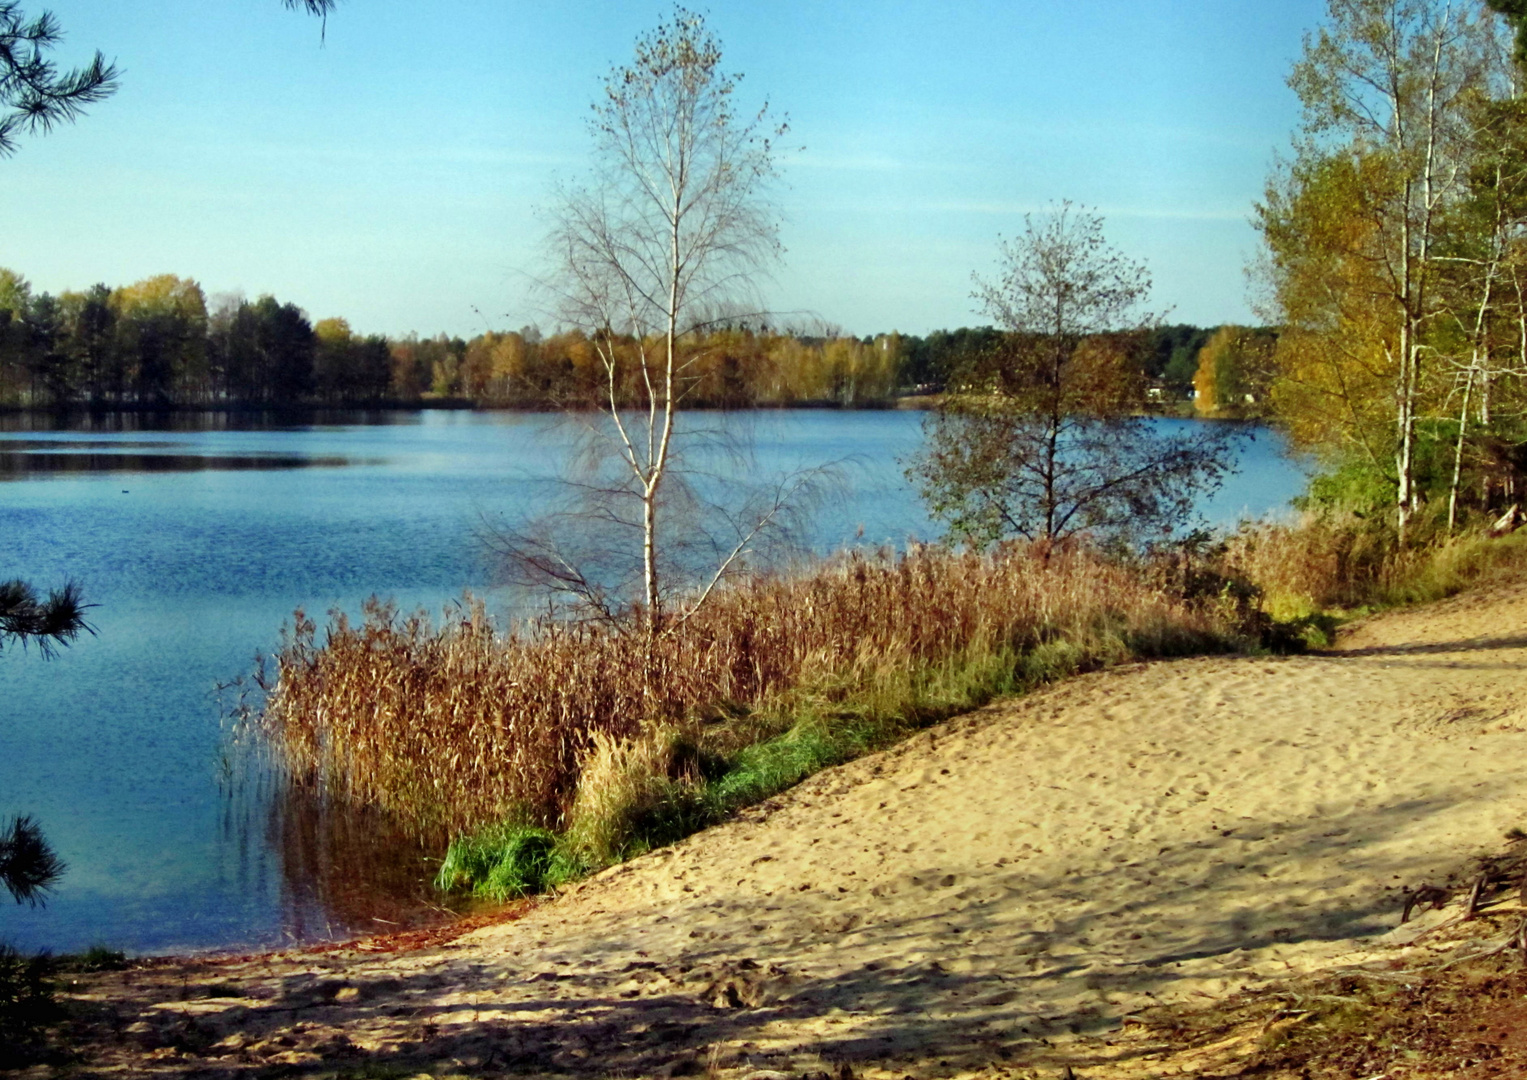 Herbst am See...2)